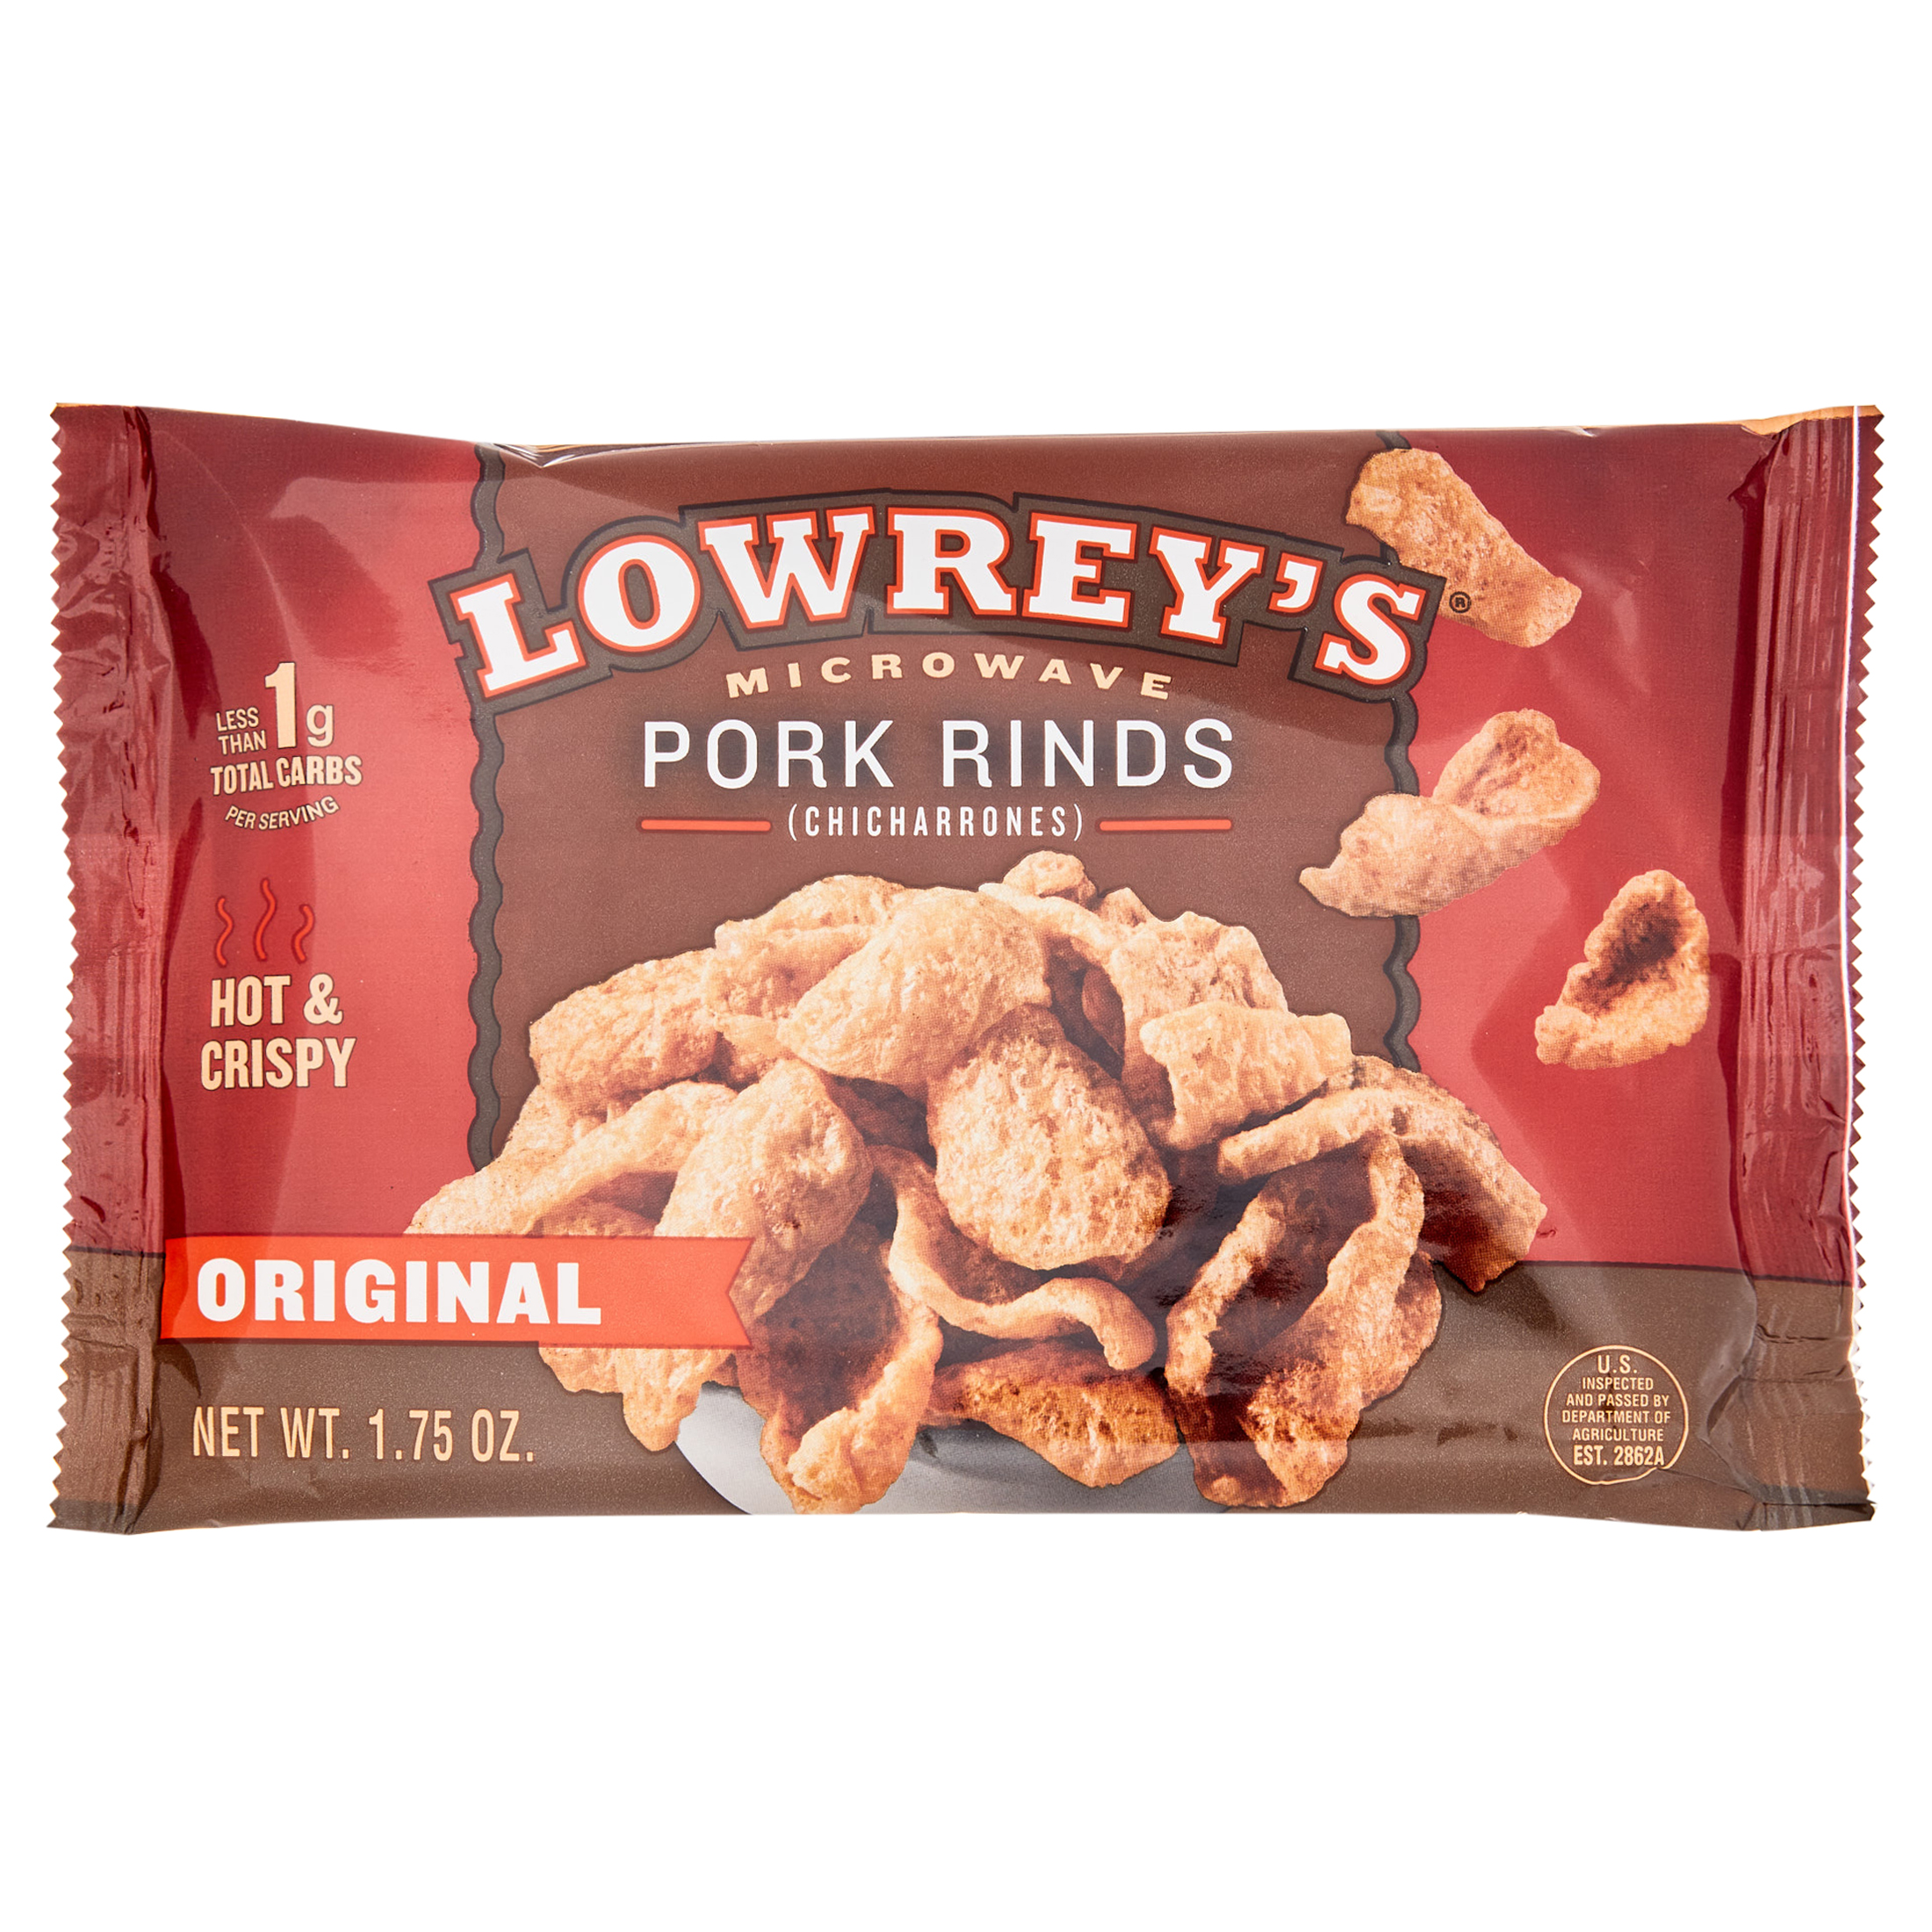 Lowrey's Bacon Curls Microwave Pork Rinds (Chicharrones), Original, 1.75 Ounce (Pack of 18) - image 2 of 6